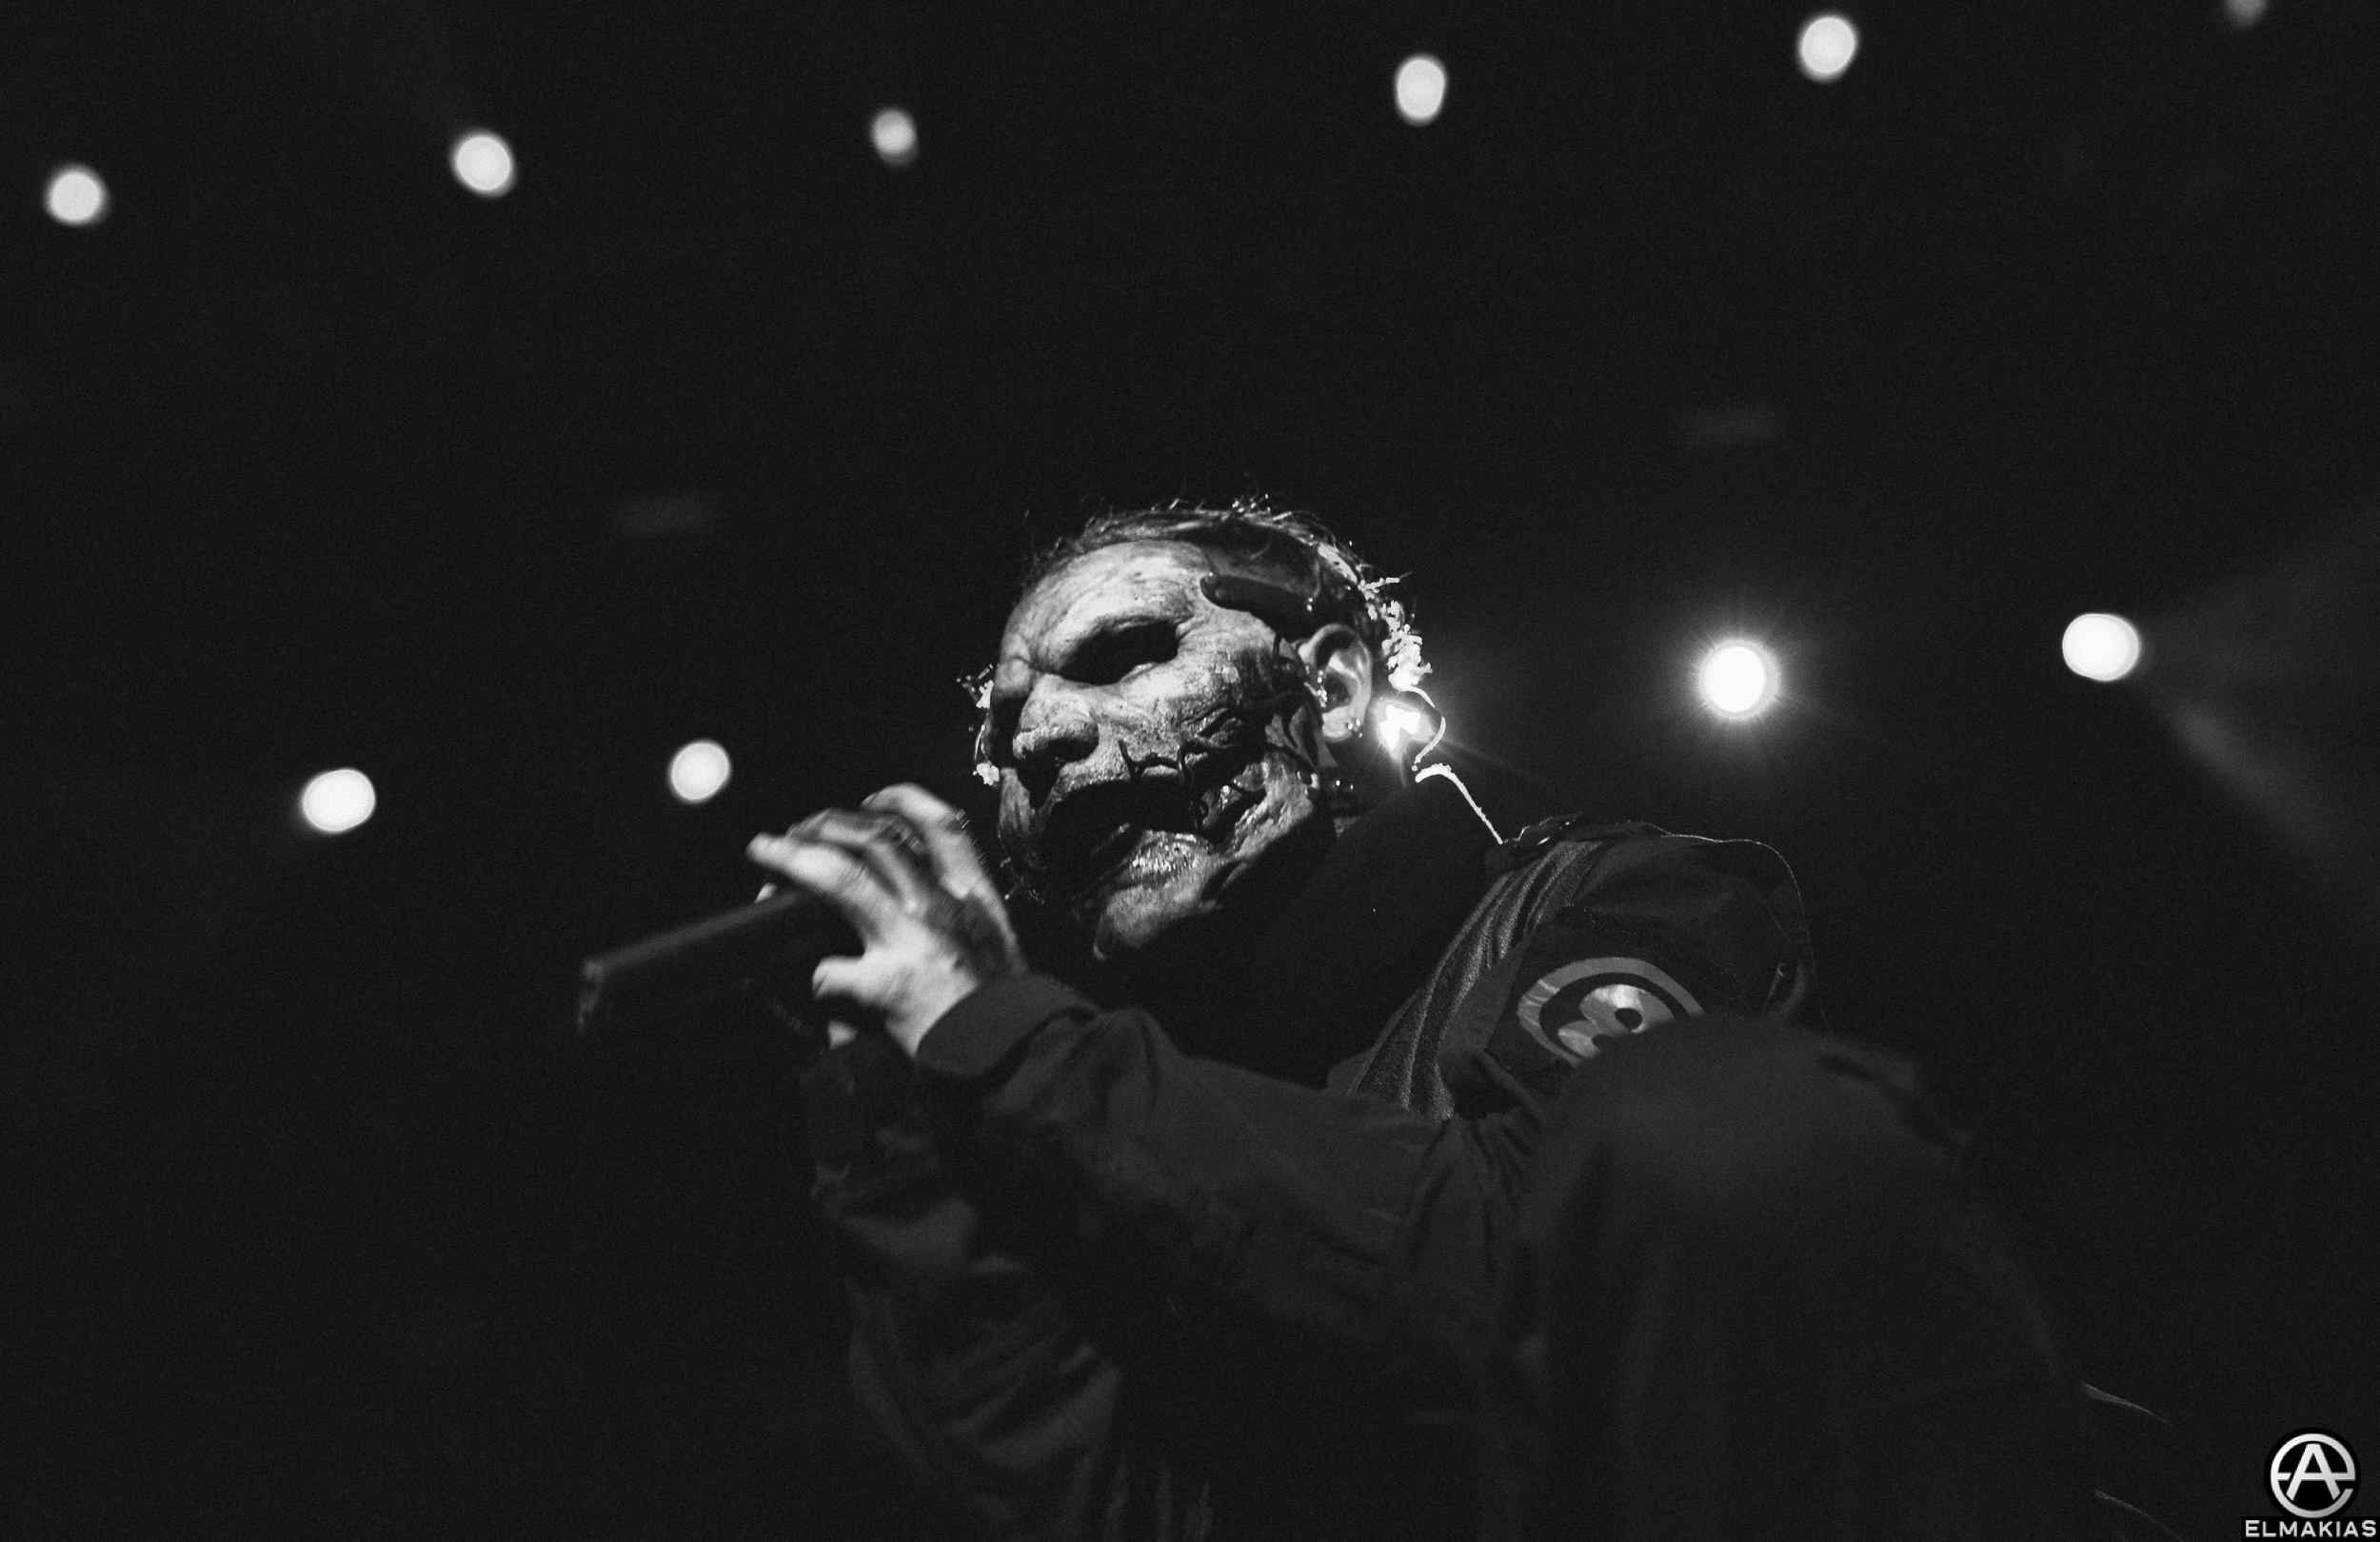 Corey Taylor of Slipknot photographed with the Sigma 50mm ART f/1.4